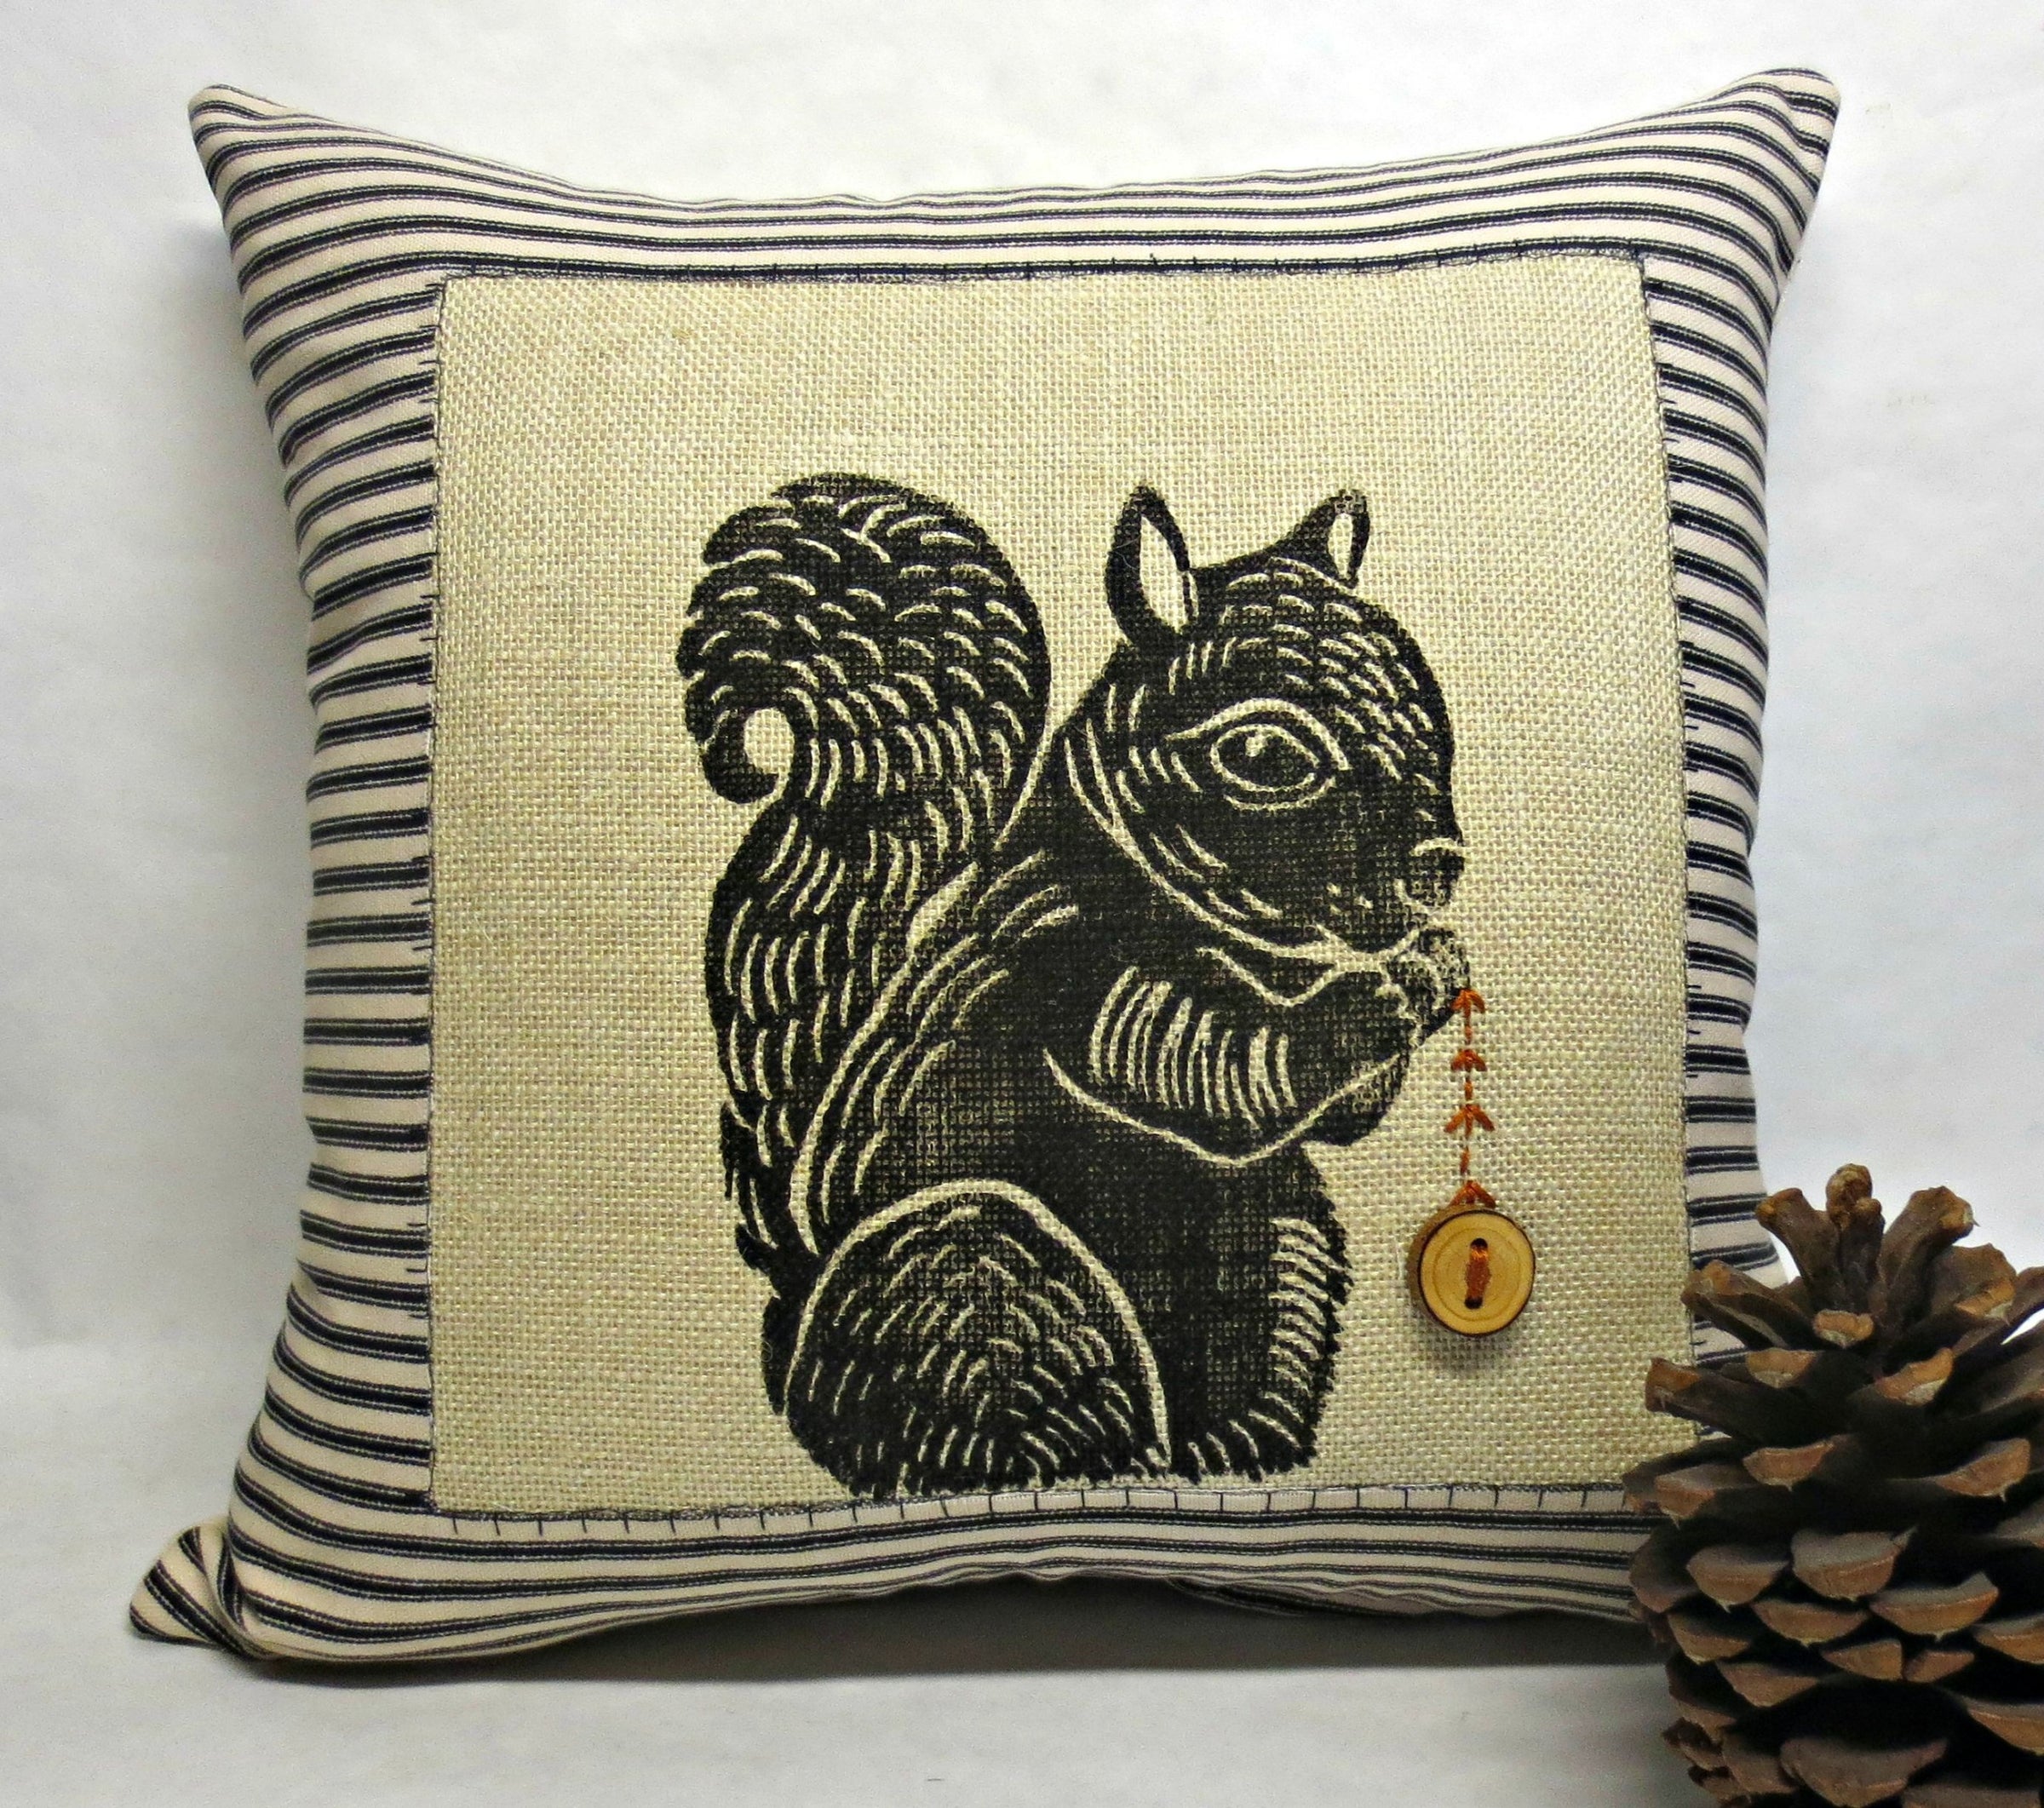 18 Gray Squirrel Decorative Square Throw Pillows, Set of 4 - Accent Pillows  - Wild Wings